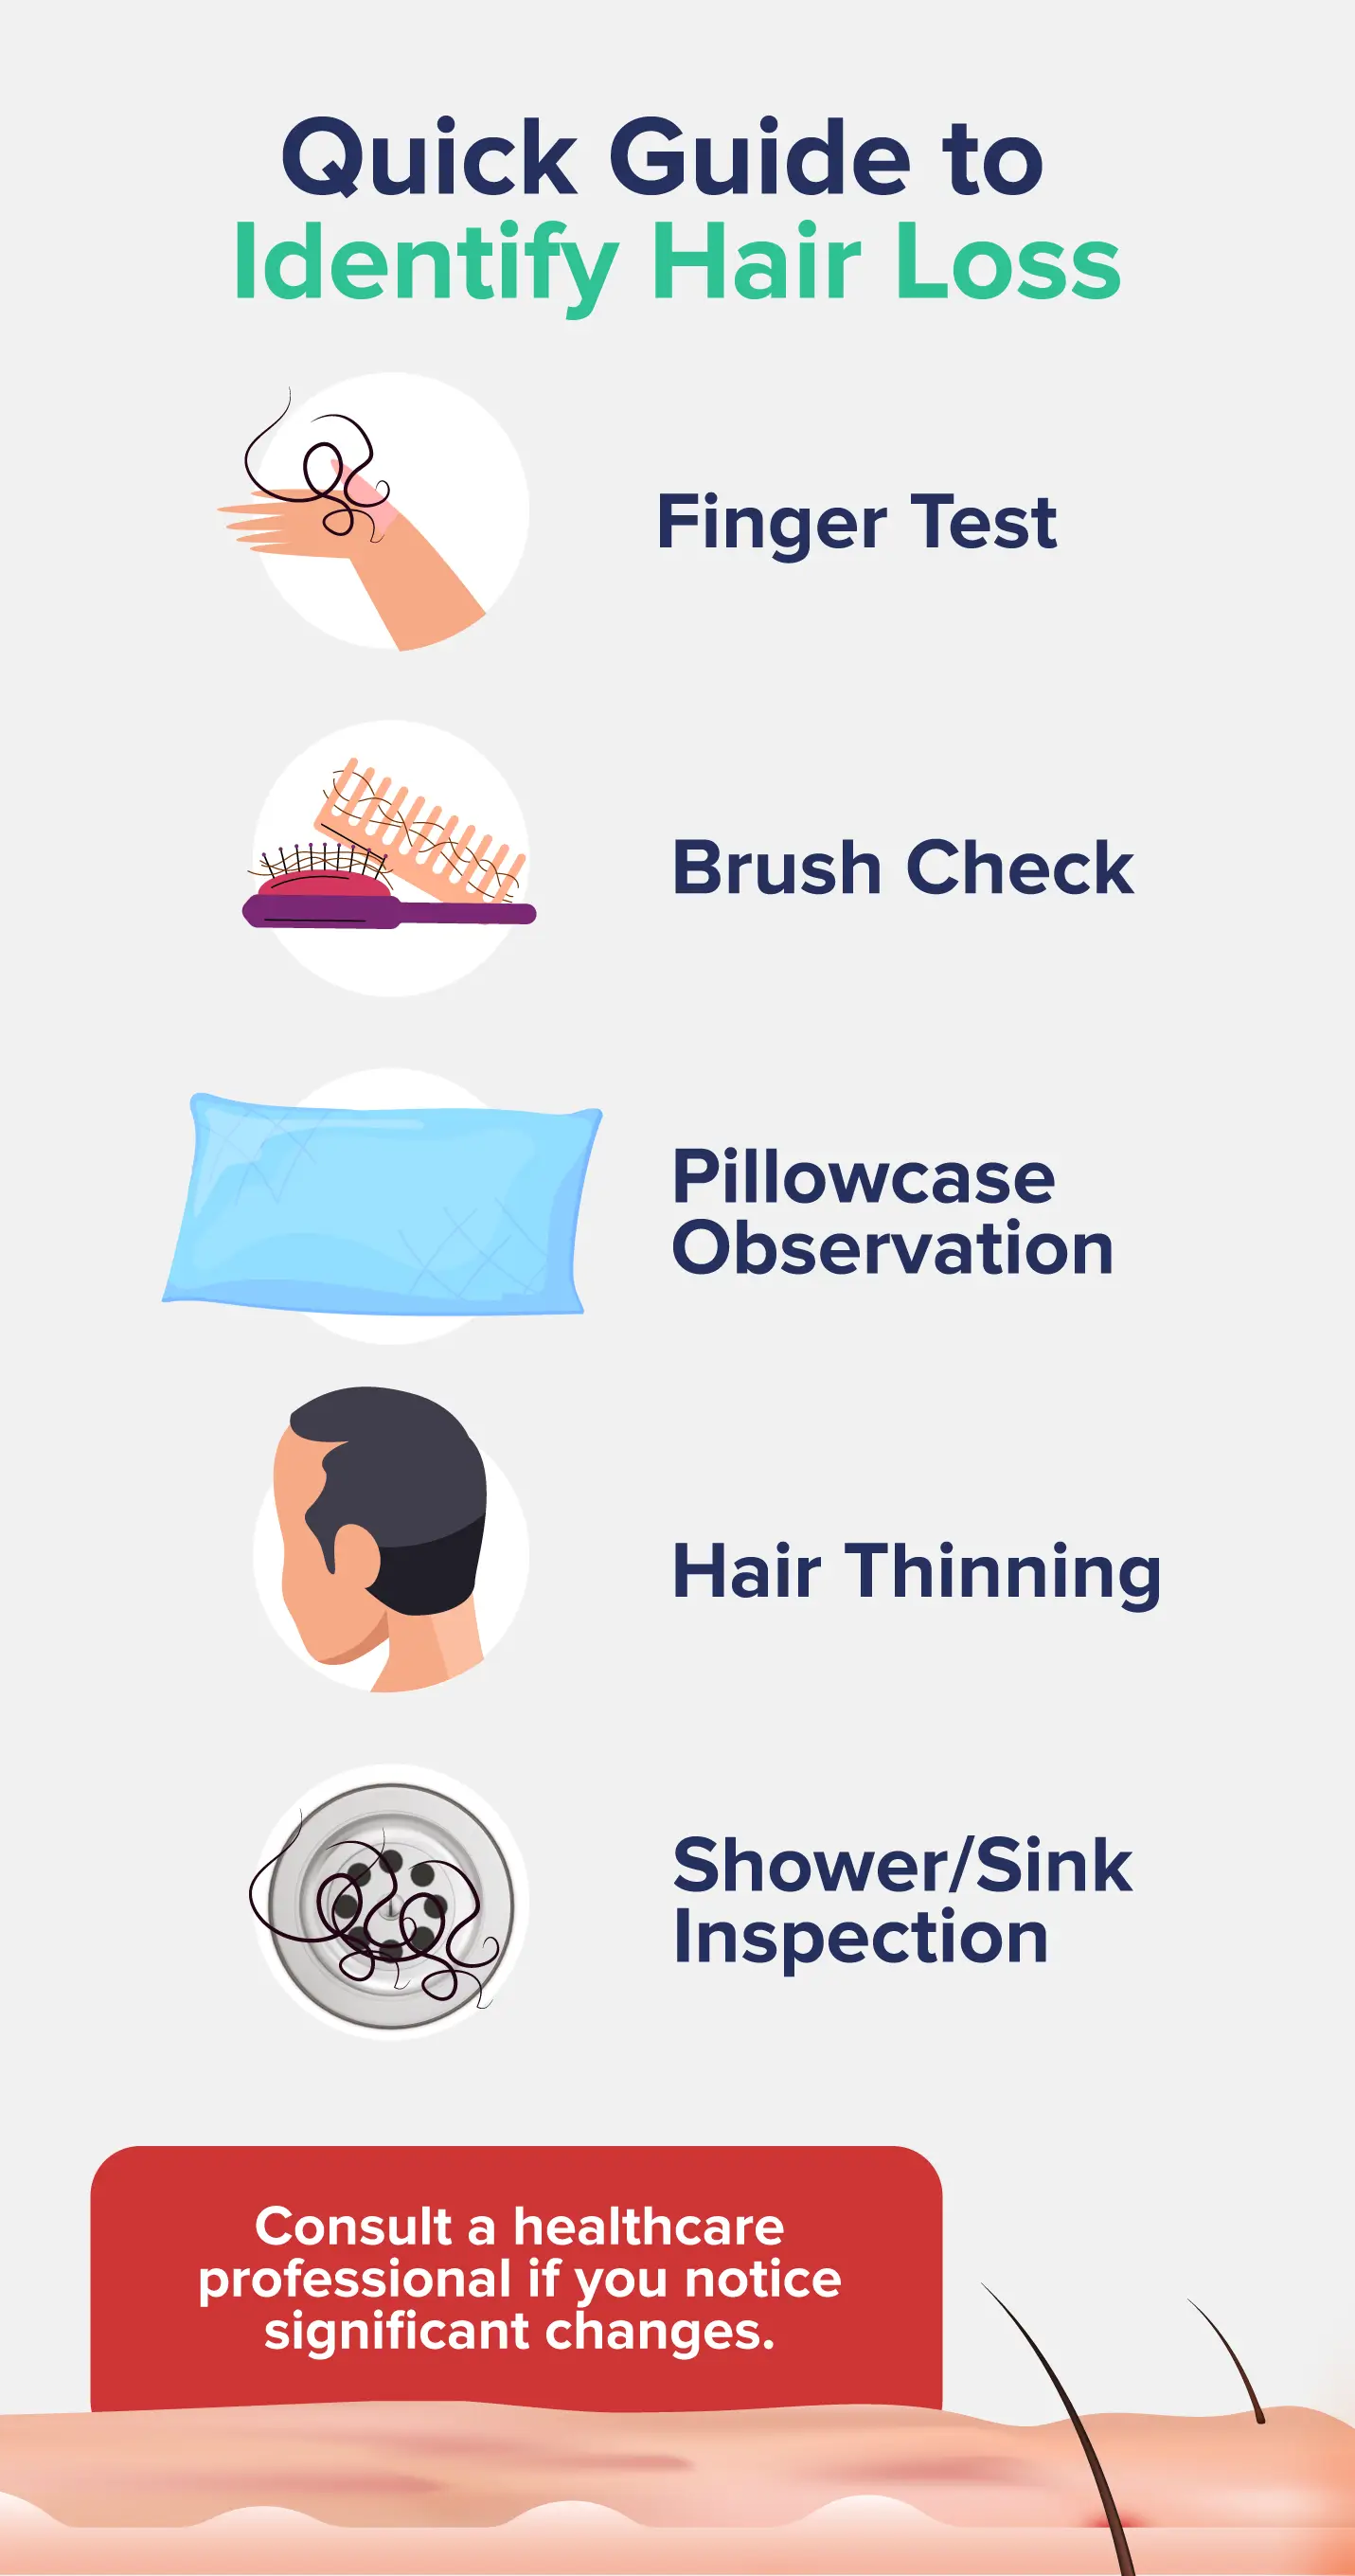 Quick Guide to Identify Hair Loss- Finger test- Brush Check - Pillowcase Observation- Hair Thinning - Shower/Sink Inspection